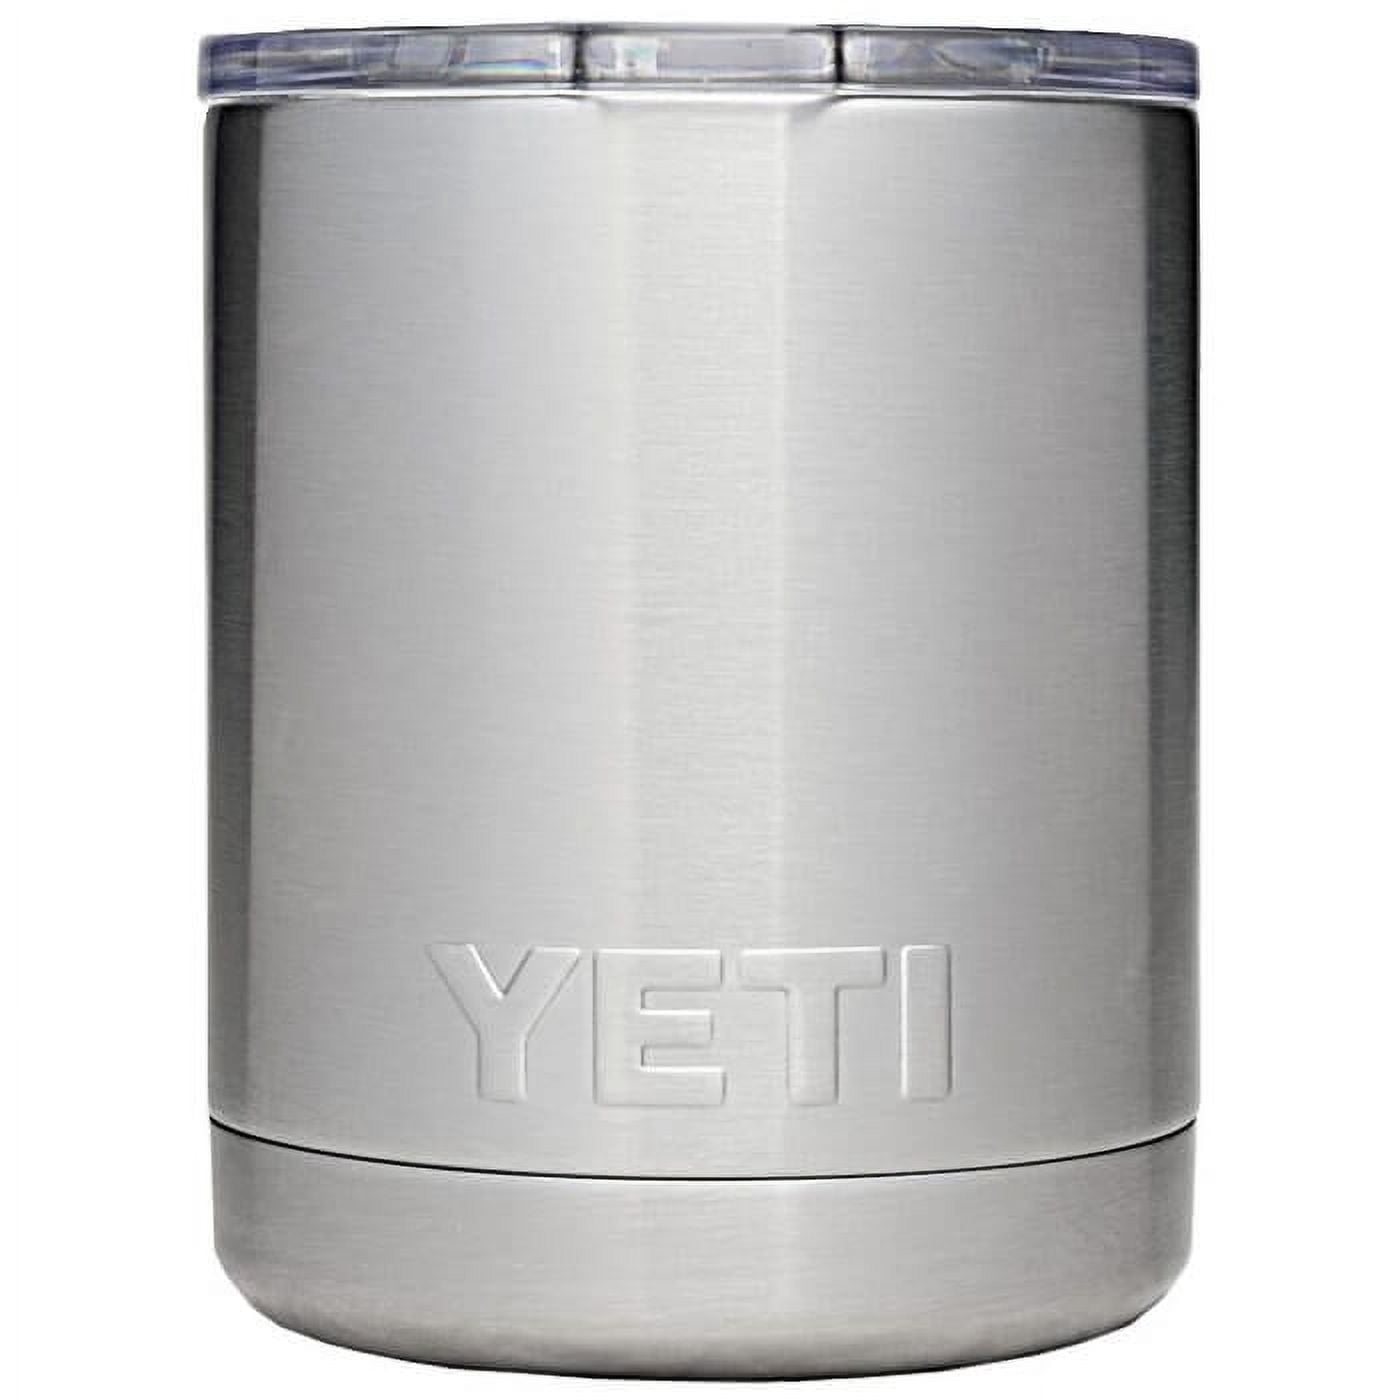 YETI Rambler 10 oz Tumbler, Stainless Steel, Vacuum Insulated  with MagSlider Lid, White: Tumblers & Water Glasses